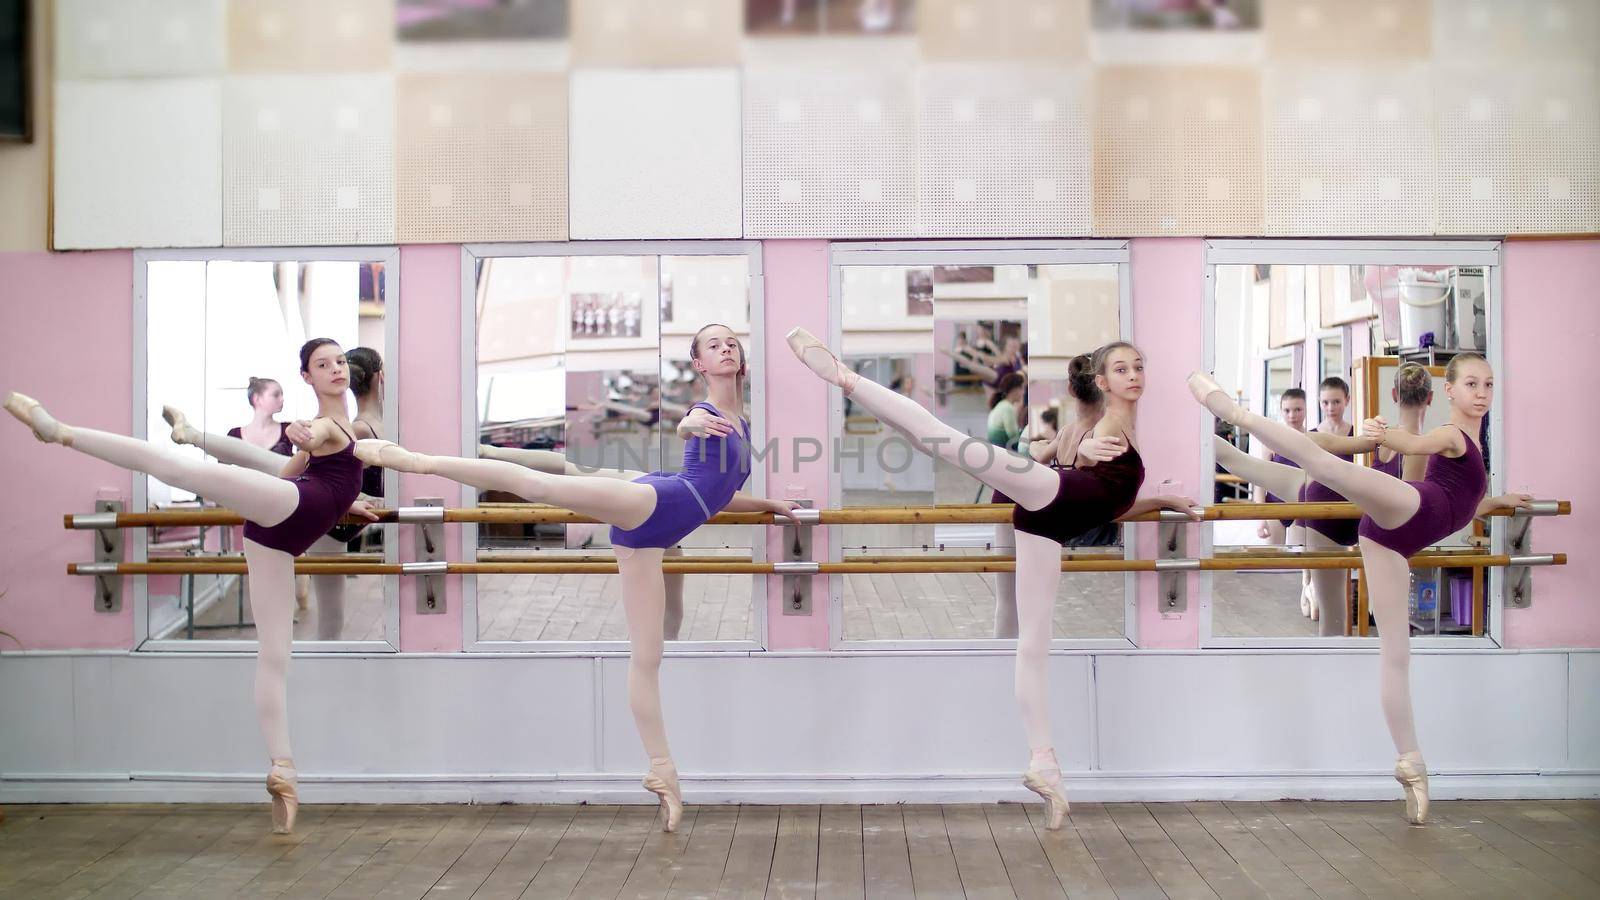 in dancing hall, Young ballerinas in purple leotards perform attitude efface on pointe shoes, standing near barre at mirror in ballet class. High quality photo